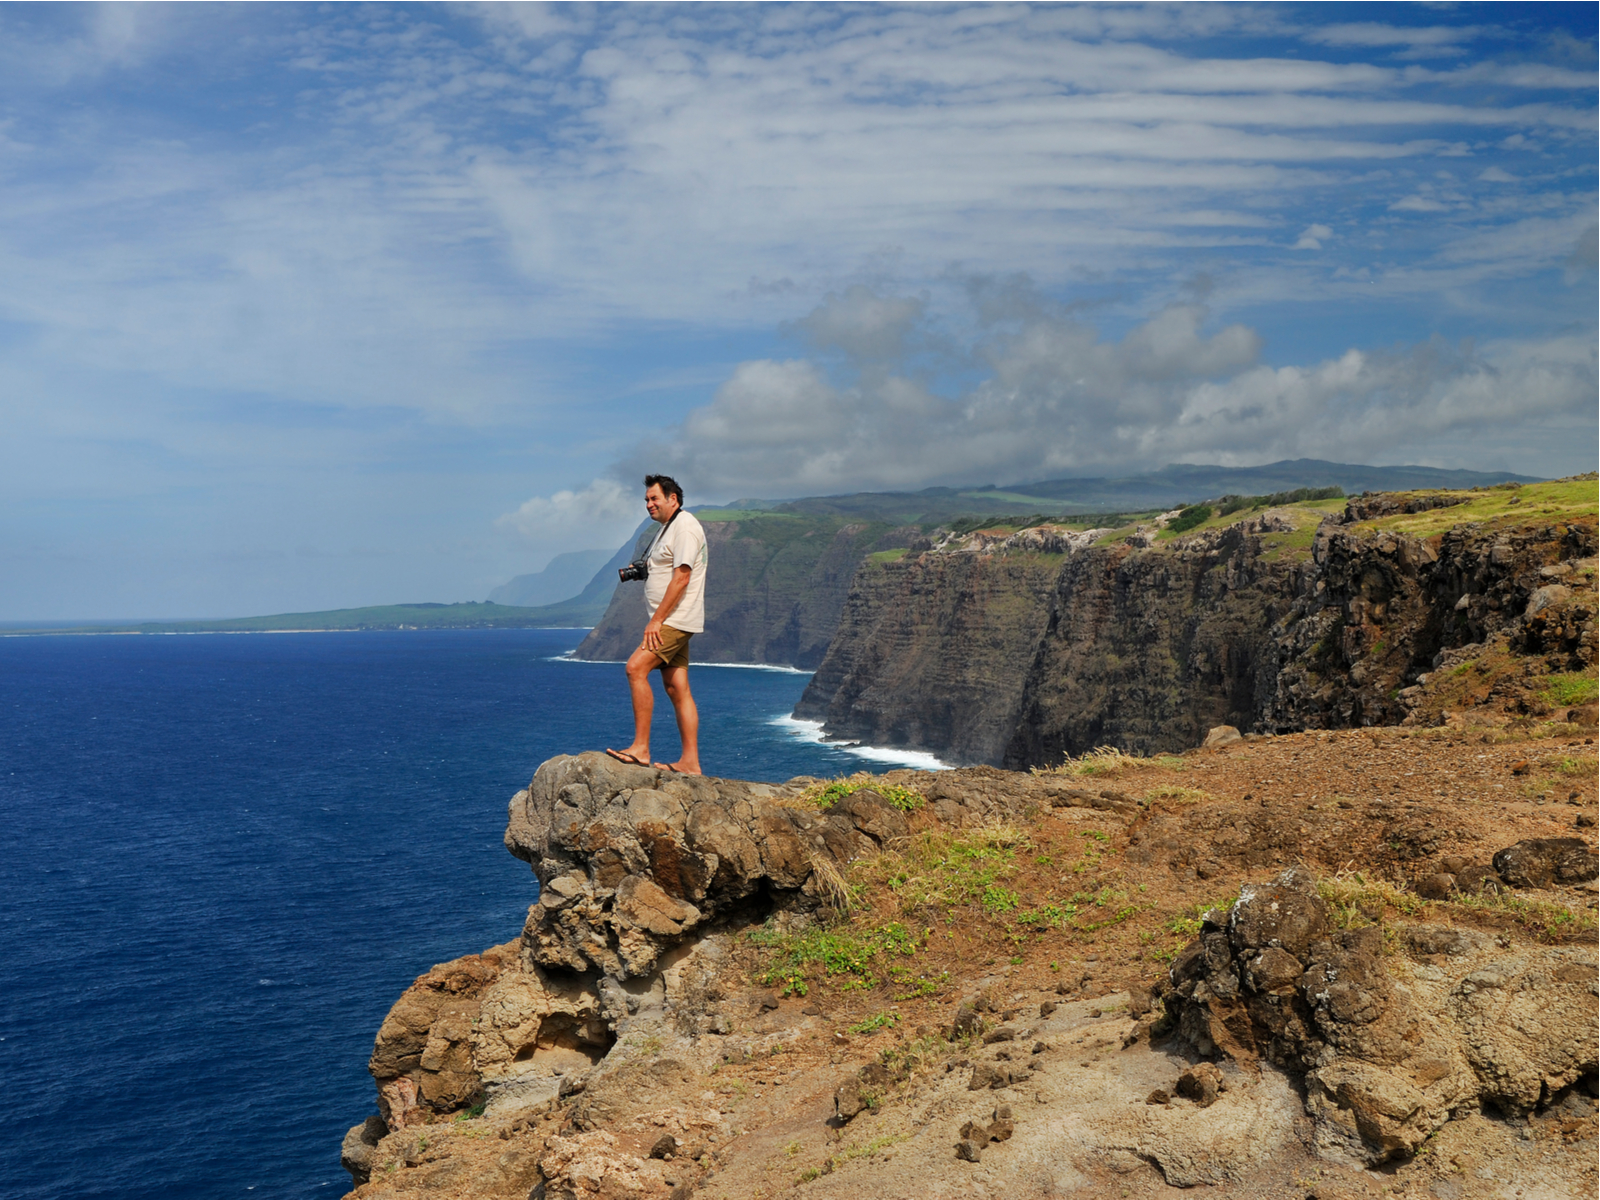 Man completing one of the best hikes in Hawaii, the Kalaupapa Peninsula Trail